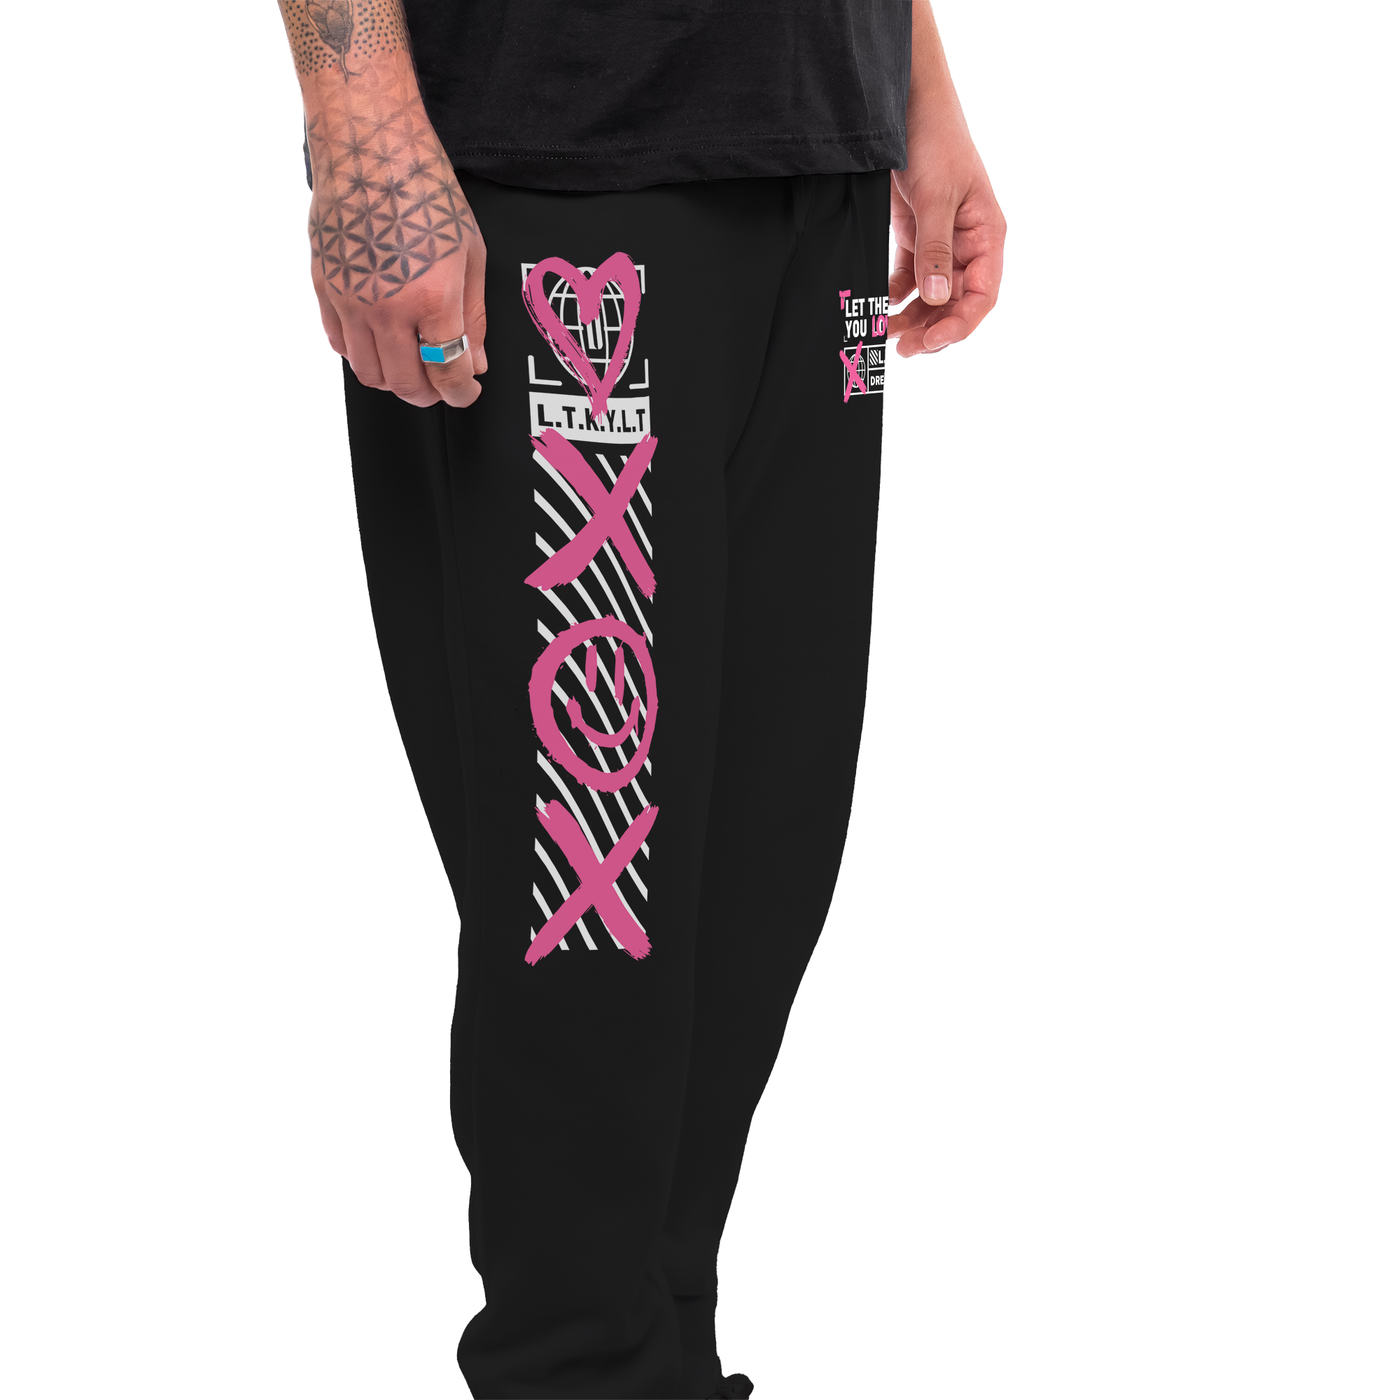 Let Them Know You Love Them No Love Jogger PantsLet Them Know You Love Them and you can help save a life.

10% Donated to TACA (The Autism Community in Action)
8.5 oz./yd² (US) 14.2 oz./L yd (CA) 80/20 Cotton/PolyDREAM Clothing 